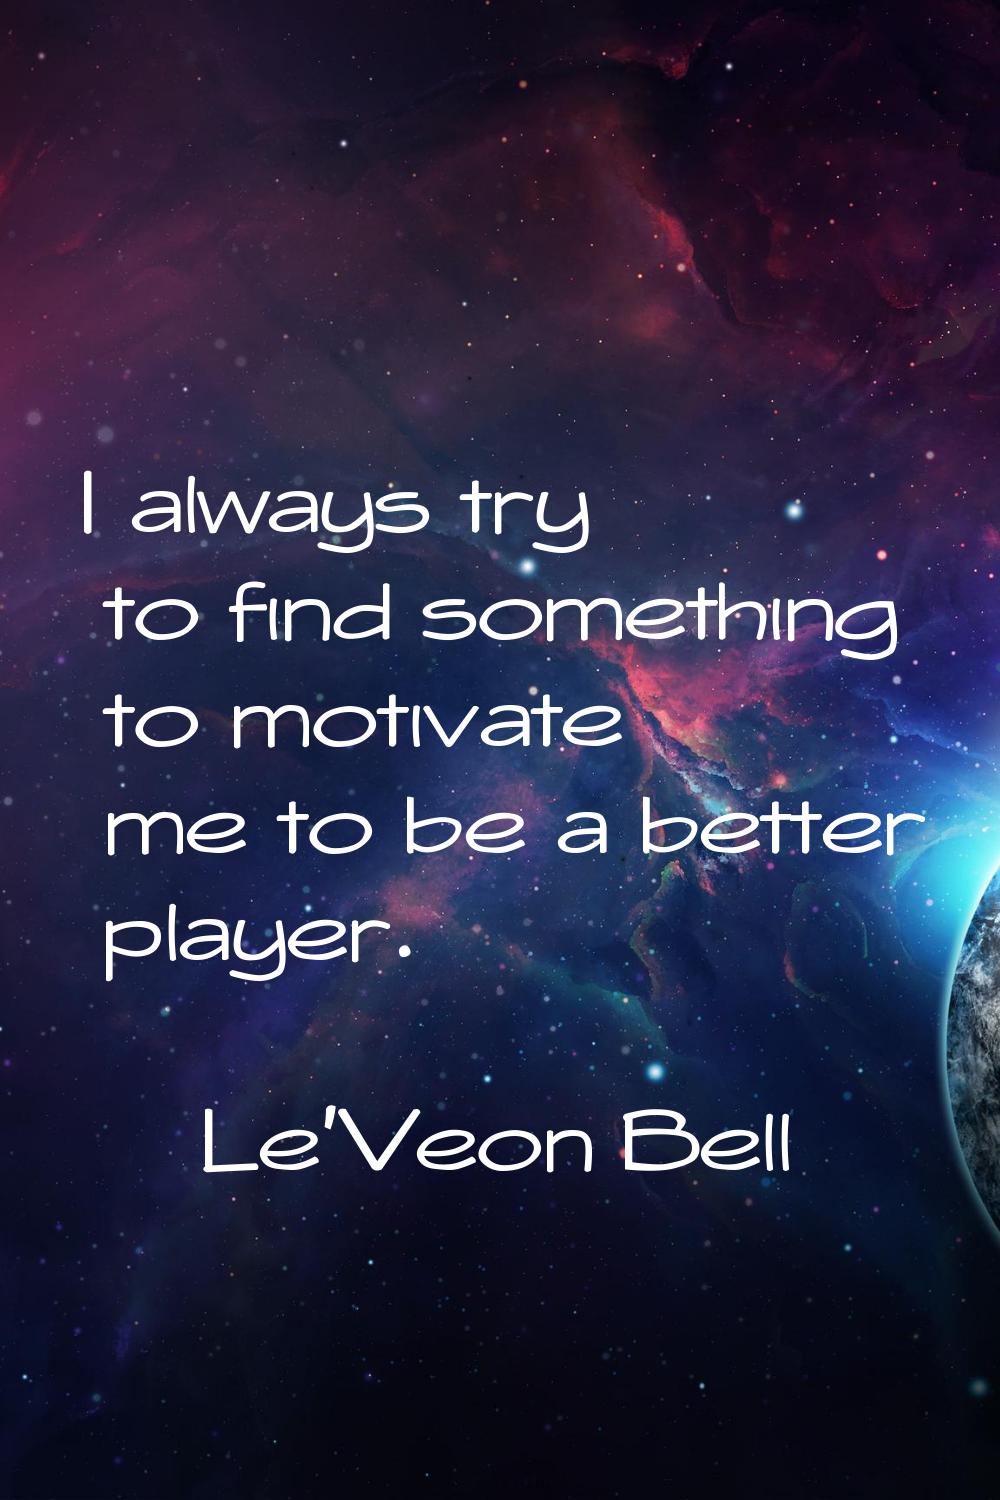 I always try to find something to motivate me to be a better player.